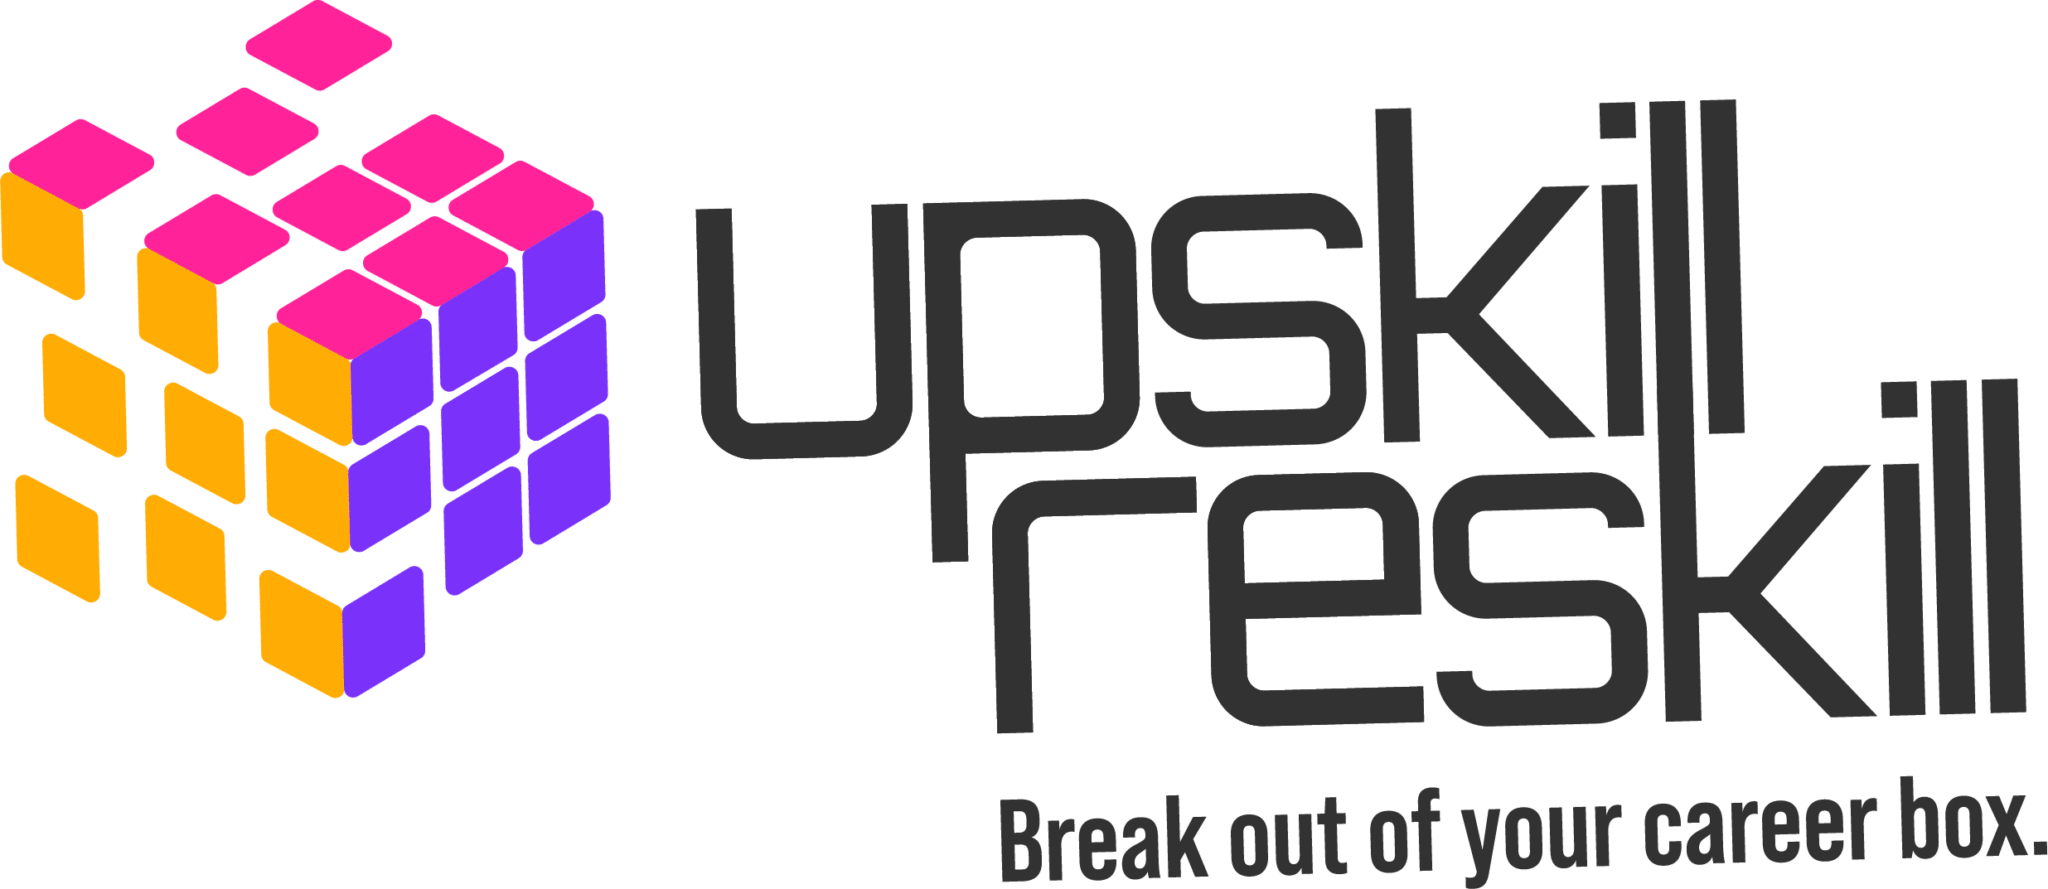  upskill reskill | break out of your career box